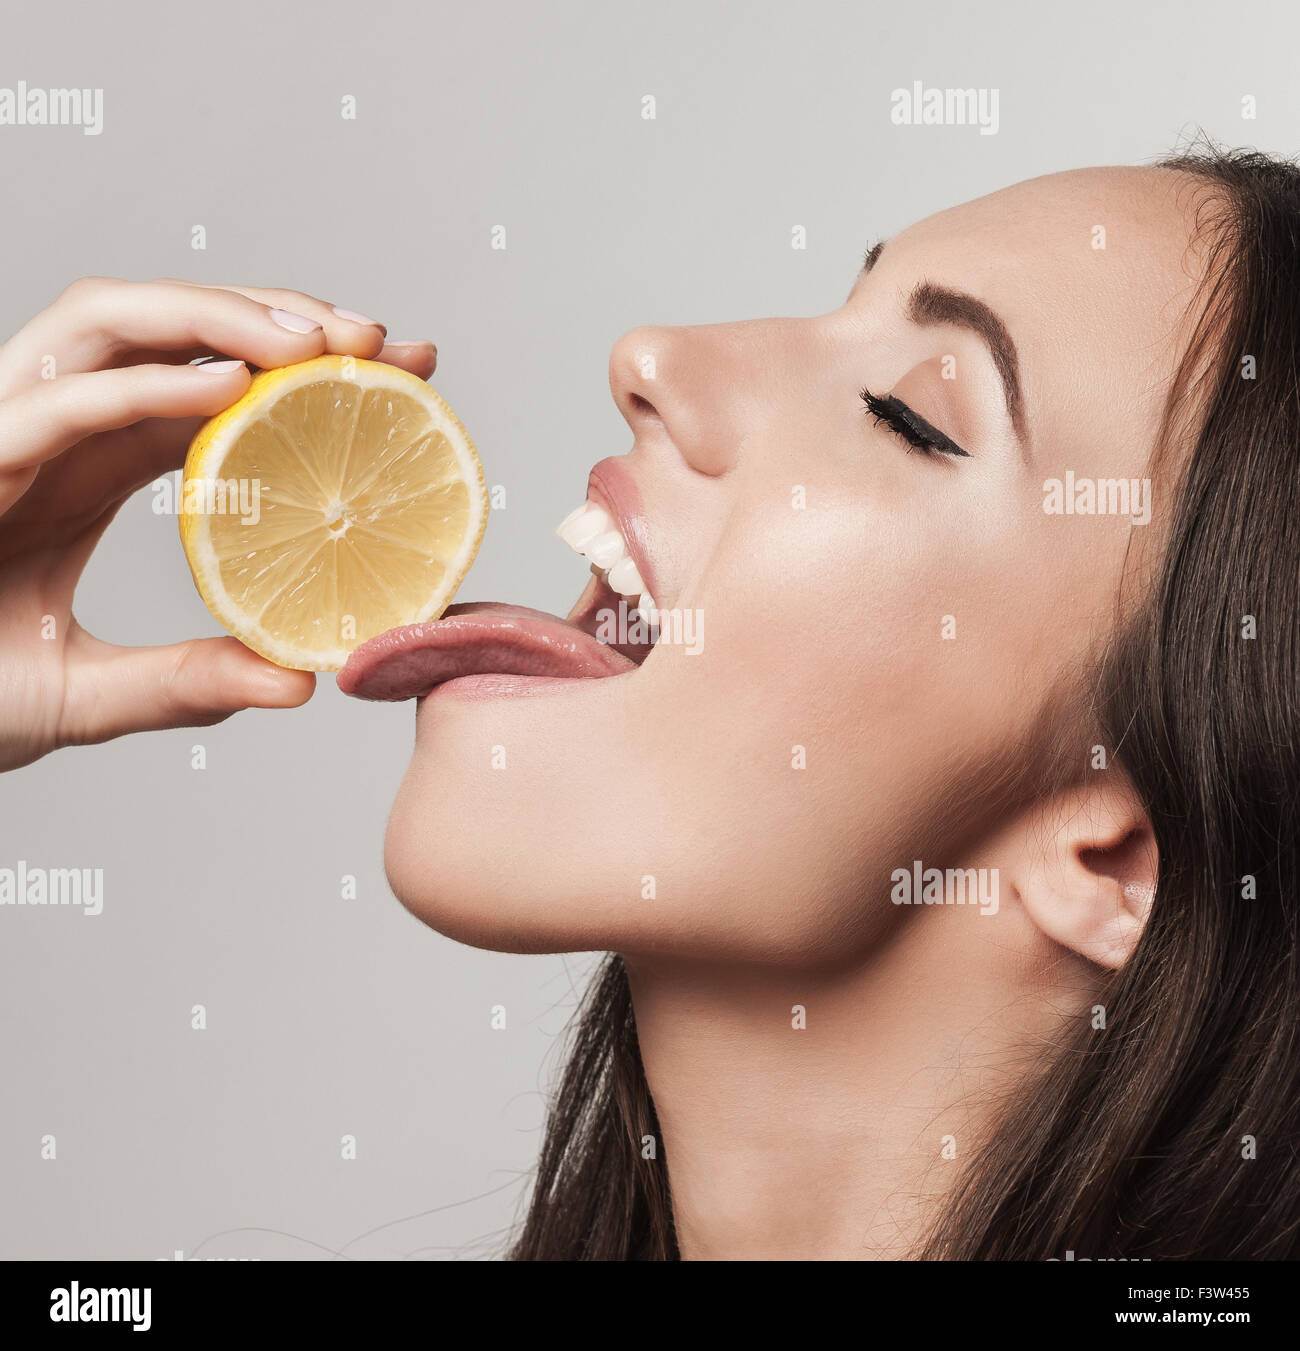 Portrait of woman promoting healthy eating. Beautiful young brunette woman holding fresh sliced lemon. Healthy eating lifestyle Stock Photo